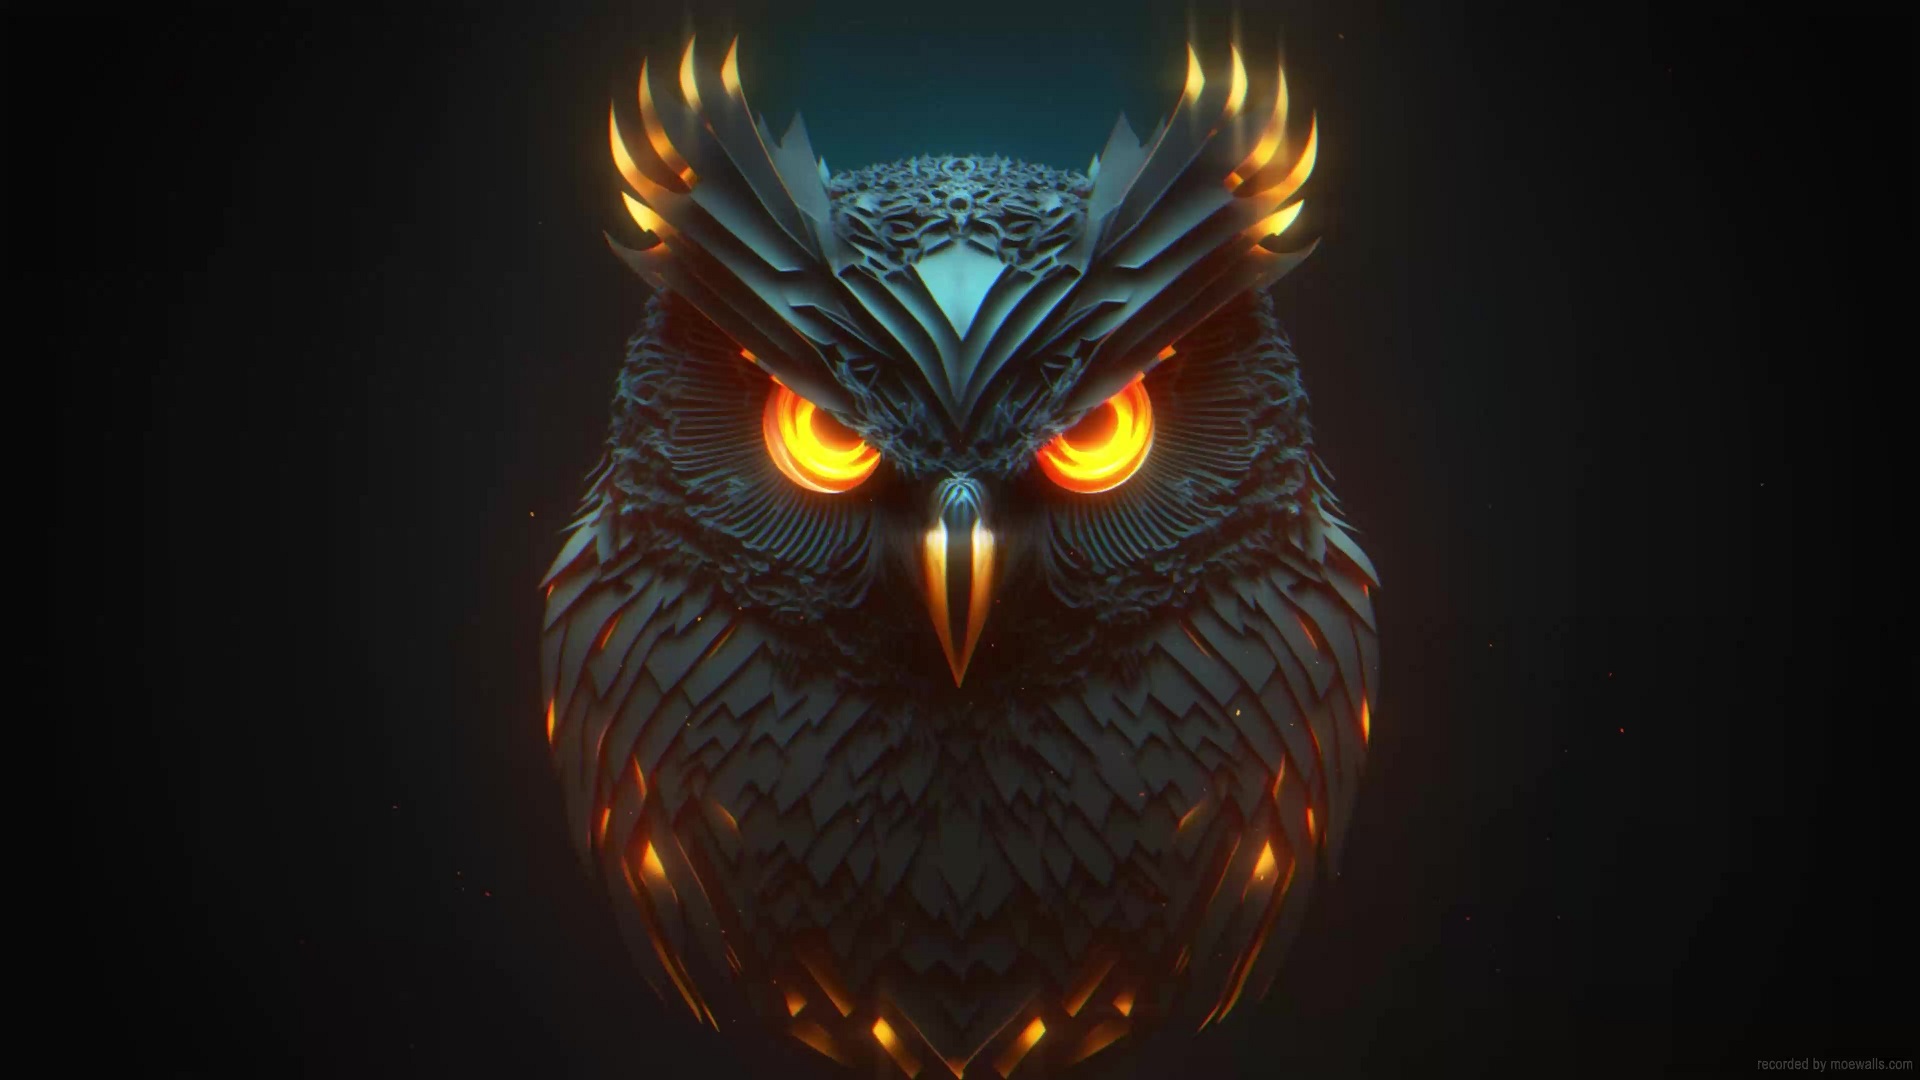 3 Owl Live Wallpapers, Animated Wallpapers - MoeWalls